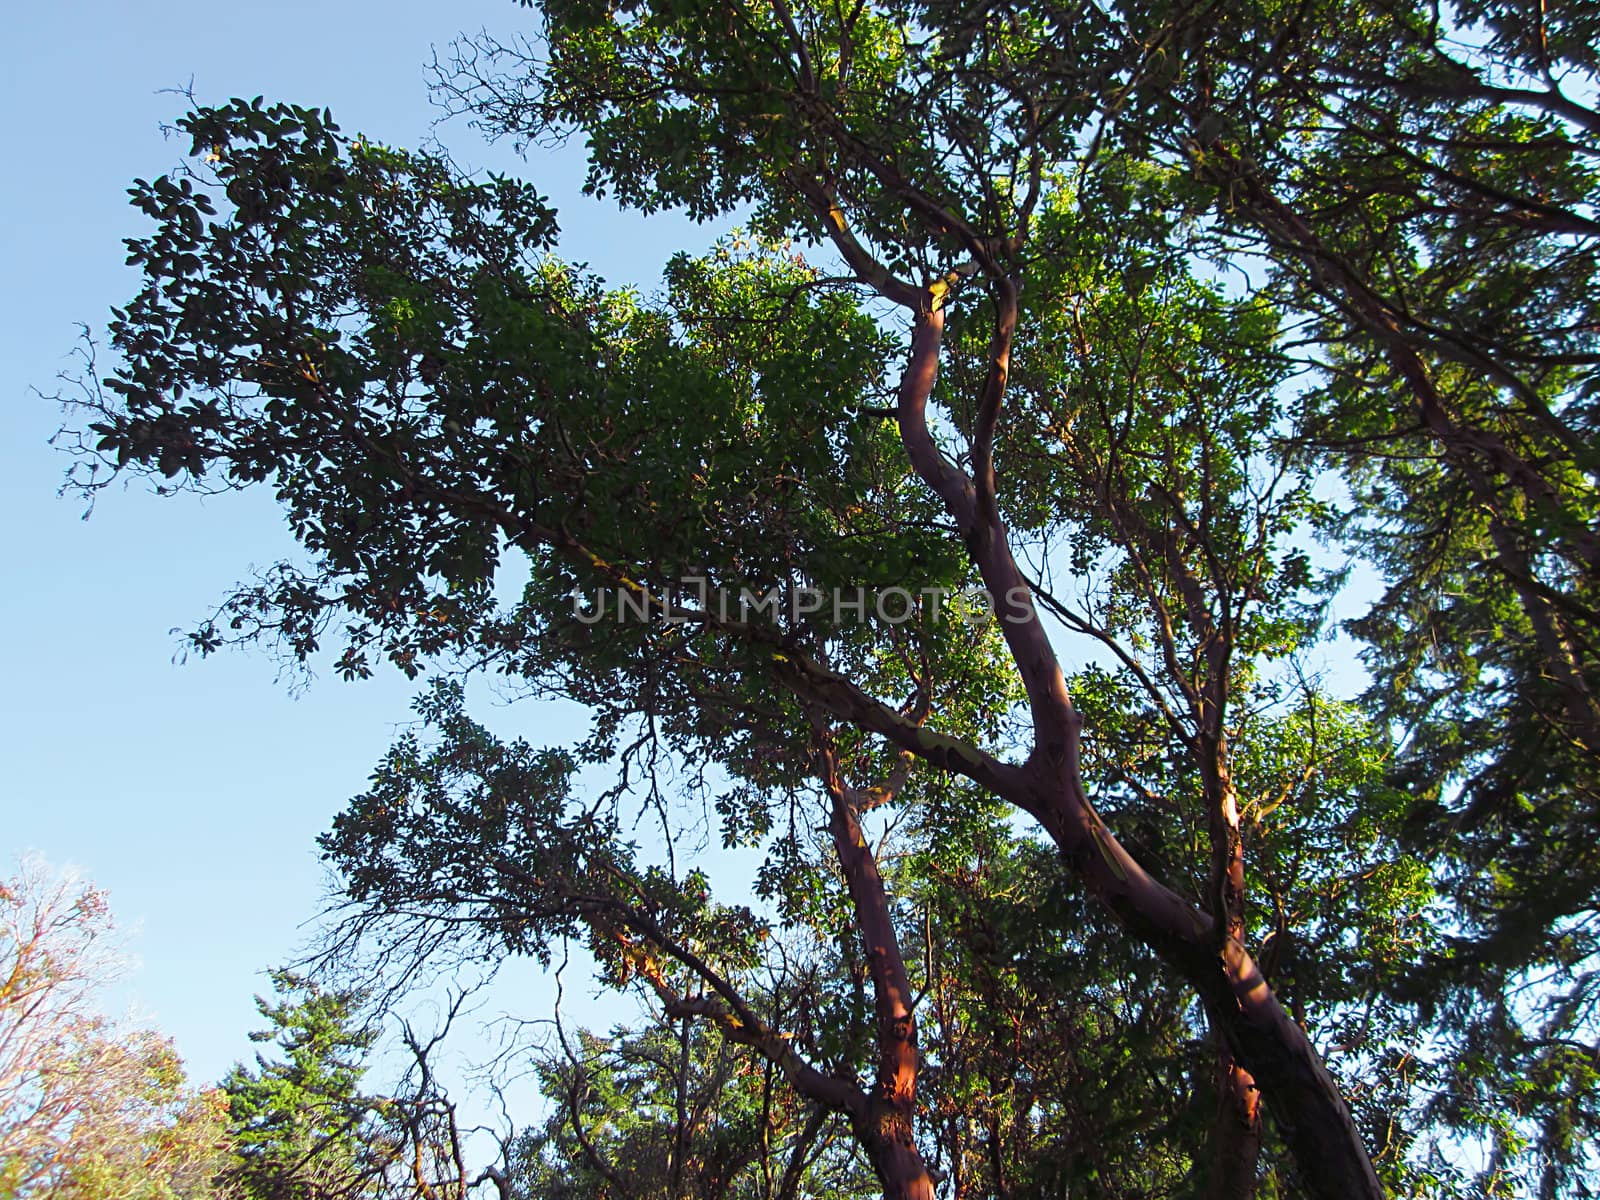 A photograph of the branches of a Pacific Madrone tree.  The Pacific Madrone (Latin Name: Arbutus menziesii) is a species of tree found on the west coast of North America.  It is known for its distinctive red peeling bark.